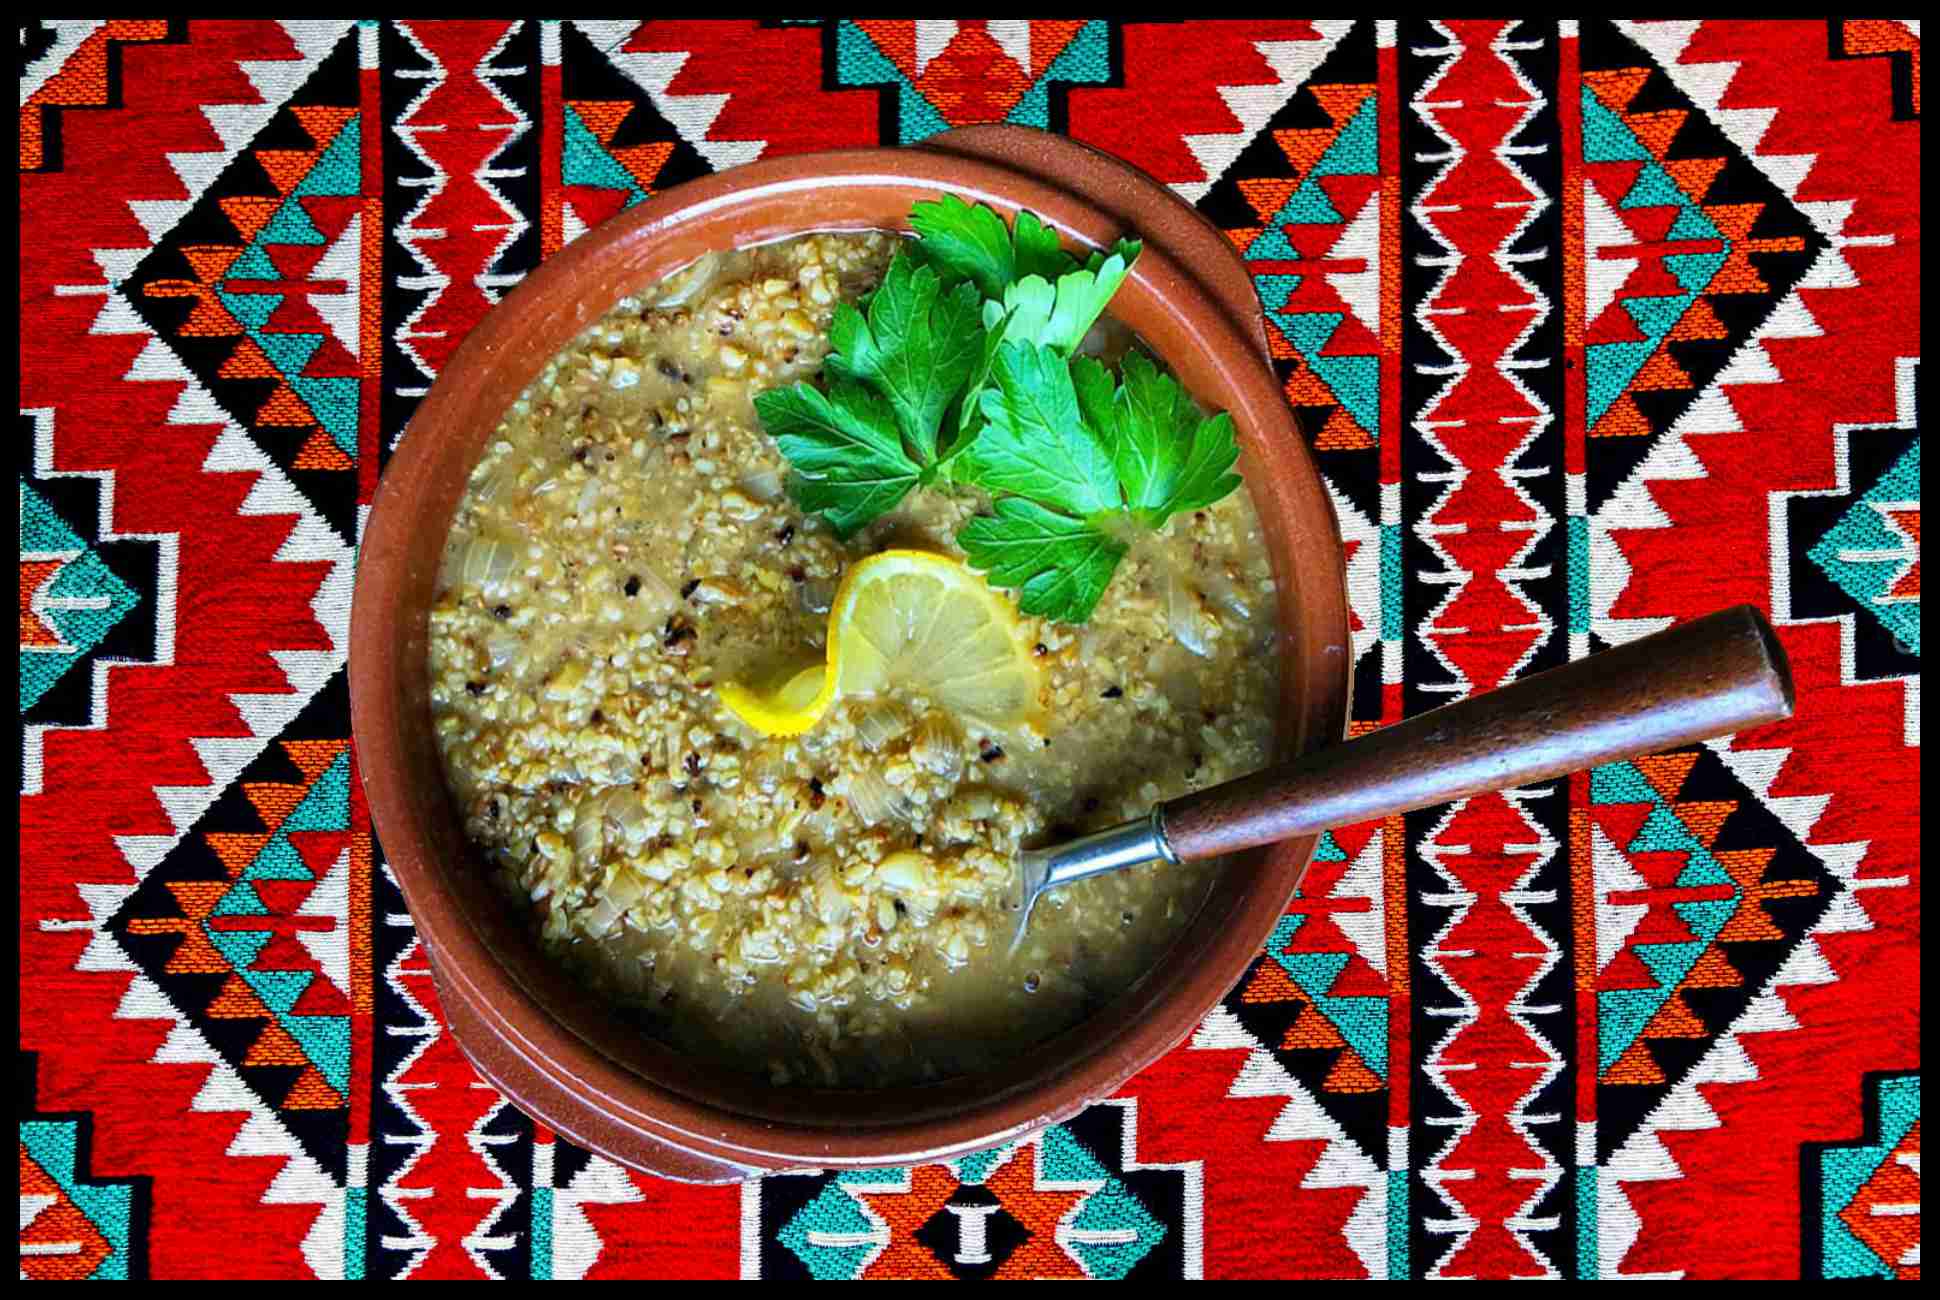 Authentic Petra Freekeh Bowl; Mom's Recipe Restaurant Petra; Freekeh Delight; Middle Eastern Flavors; Jordanian Culinary Experience; Nutrient-Rich Freekeh; Traditional Petra Cuisine; Mom's Secret Freekeh Recipe; Wholesome Grain Bowl; Petra Dining Adventure; Freekeh Feast; Homemade Middle Eastern Goodness; Savory Freekeh Bowl; Petra Foodie Haven; Local Petra Ingredients; Culinary Journey in Jordan; Mom's Signature Freekeh Dish; Petra's Best Freekeh; Petra Gastronomy; Hearty and Healthy Freekeh Delicacy; Petra's Culinary Gem; Petra Food Exploration; Freekeh Fusion; Mom's Culinary Legacy; Petra's Finest Grain Bowl; Authentic Jordanian Freekeh; Mom's Love in Every Bite; Petra's Culinary Tradition; Wholesome Petra Dining; Freekeh Elegance in Petra;